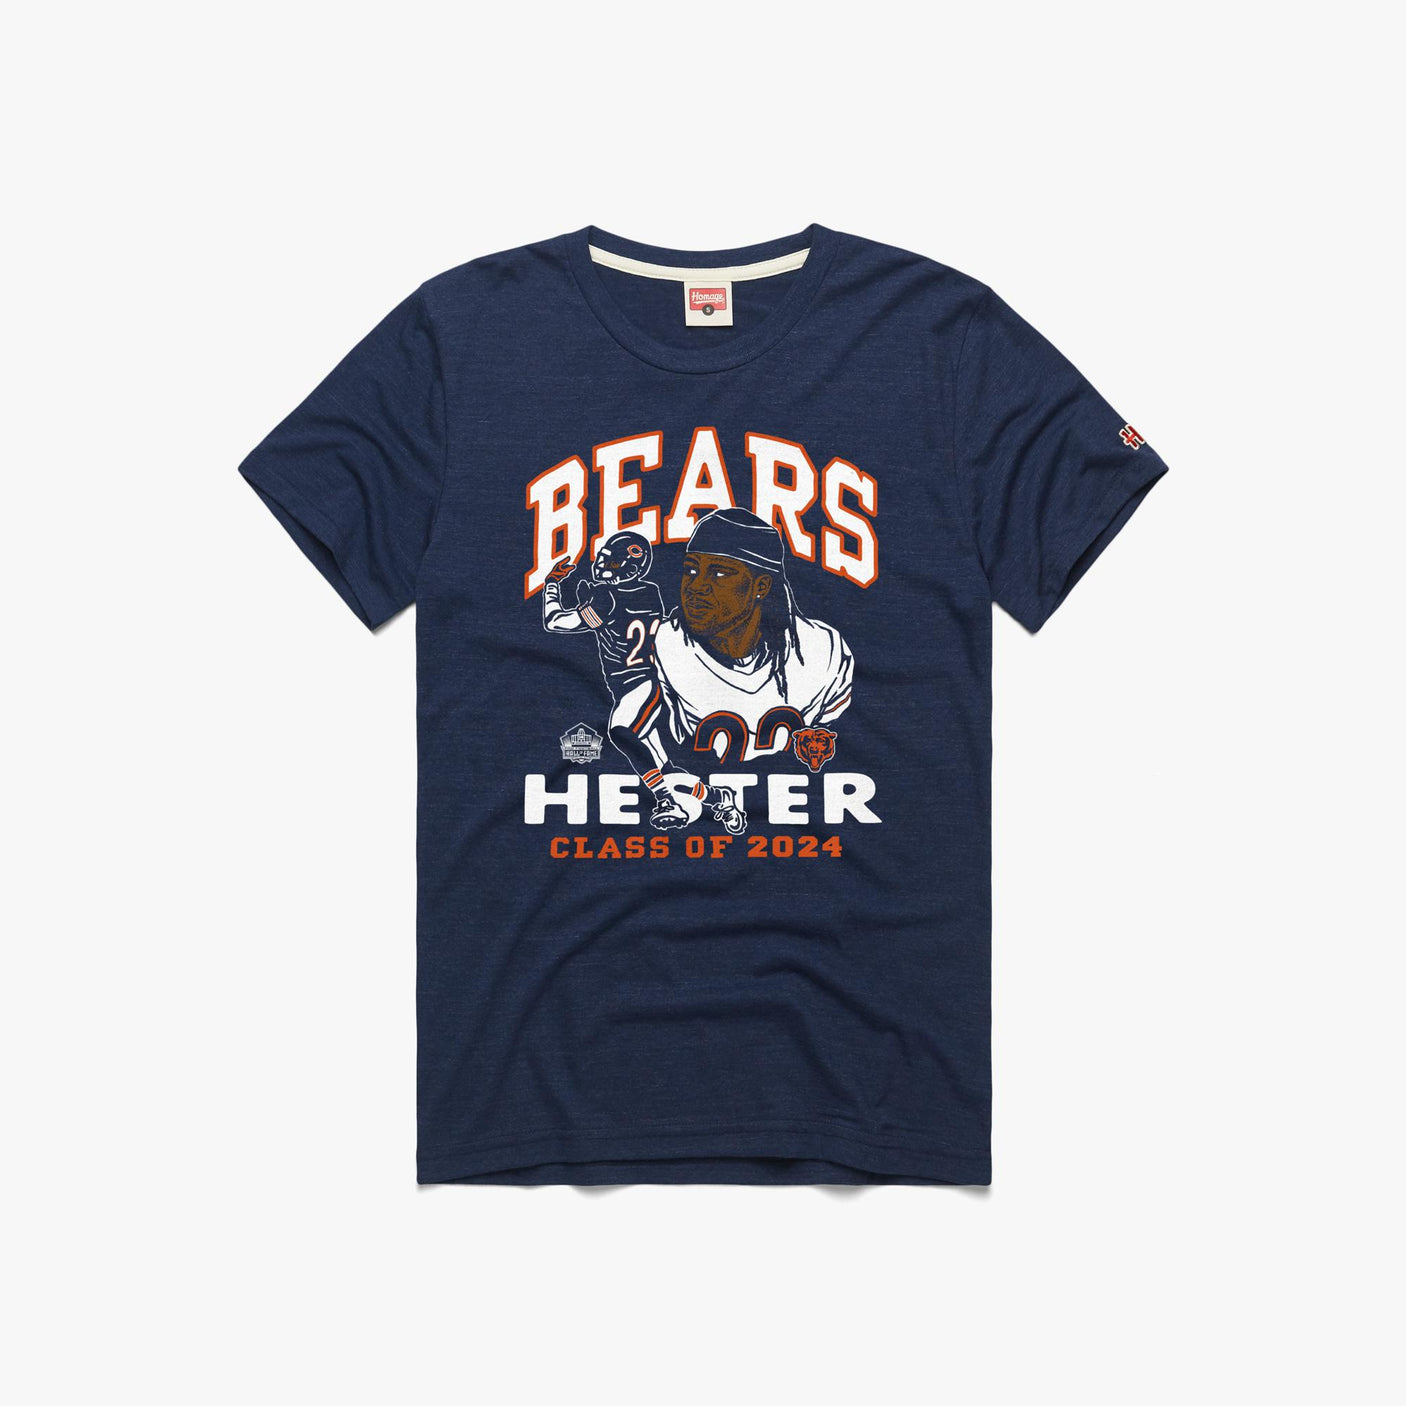 Devin Hester Class of 2024 Homage T-Shirt